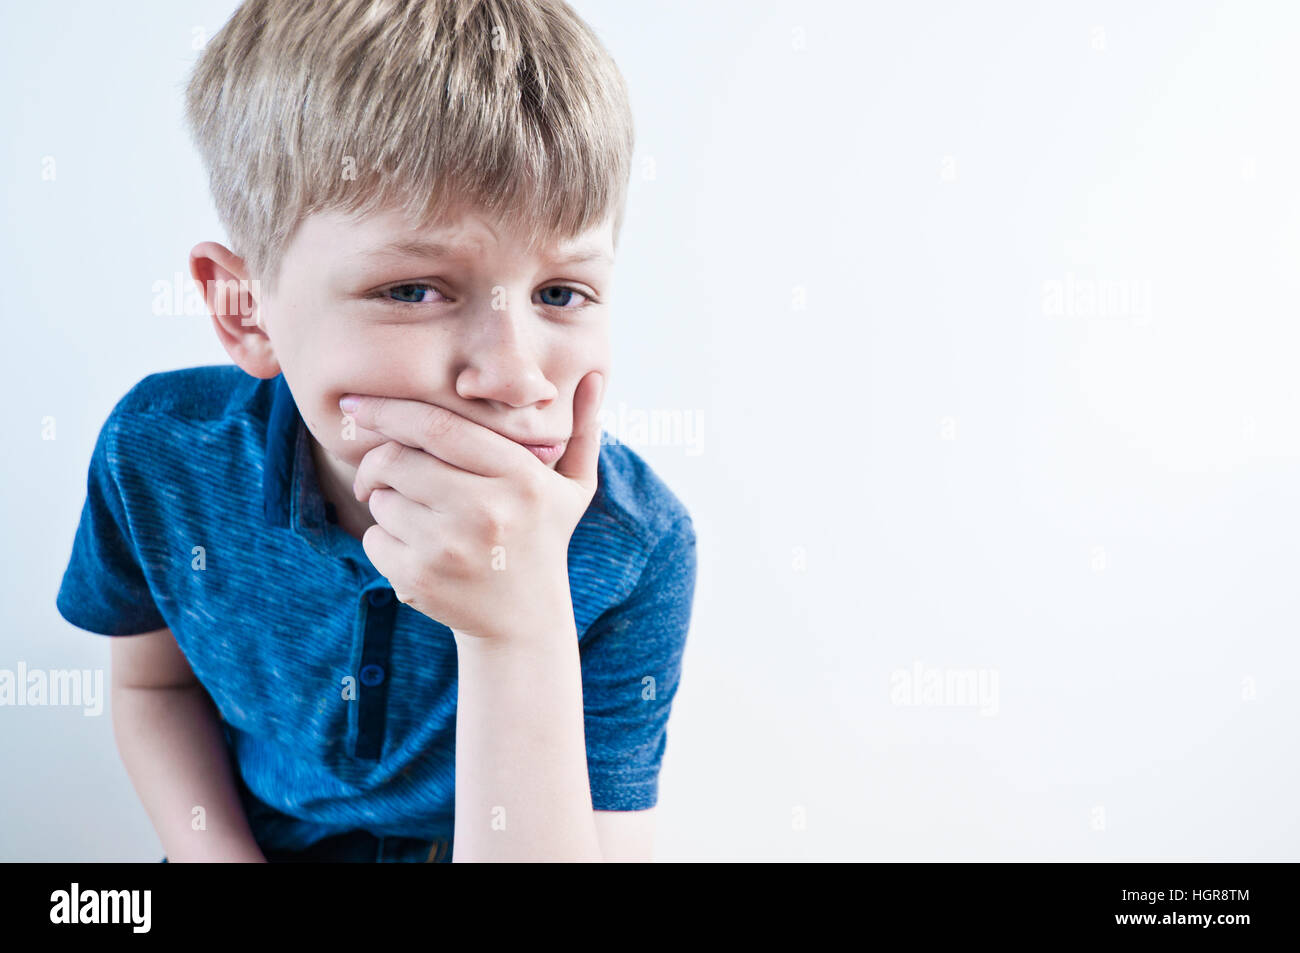 A worried boy thinking deeply Stock Photo